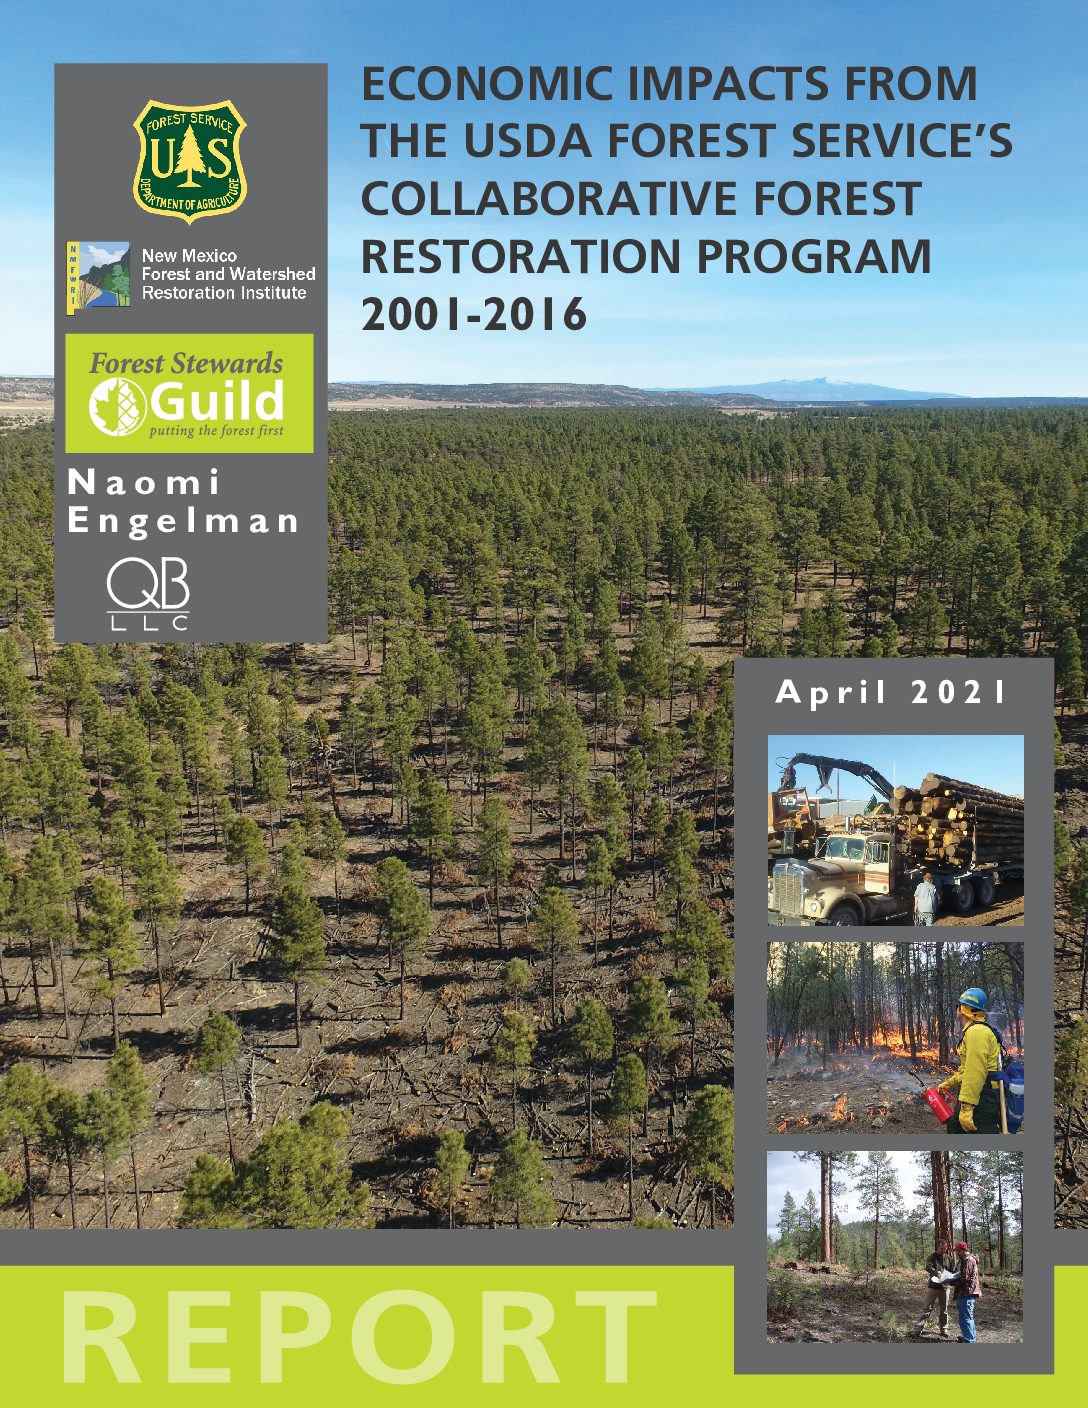 Economic Impacts From the USDA Forest Service's Collaborative Forest Restoration Program 2001-2016